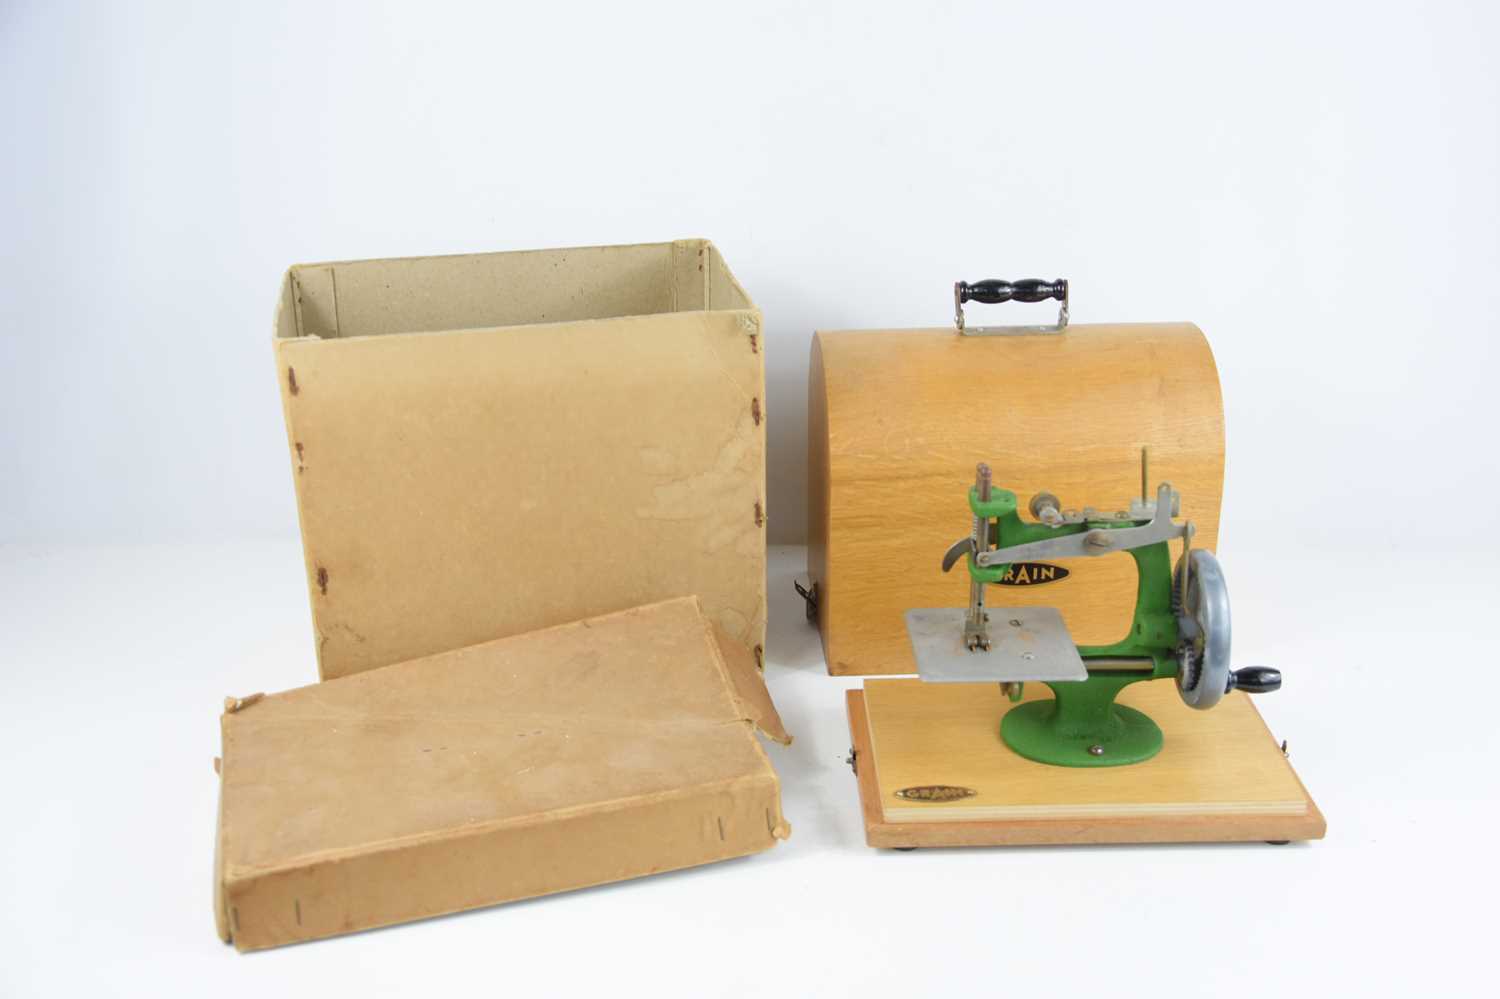 Lot 322 - A vintage Grain toy sewing machine, boxed.